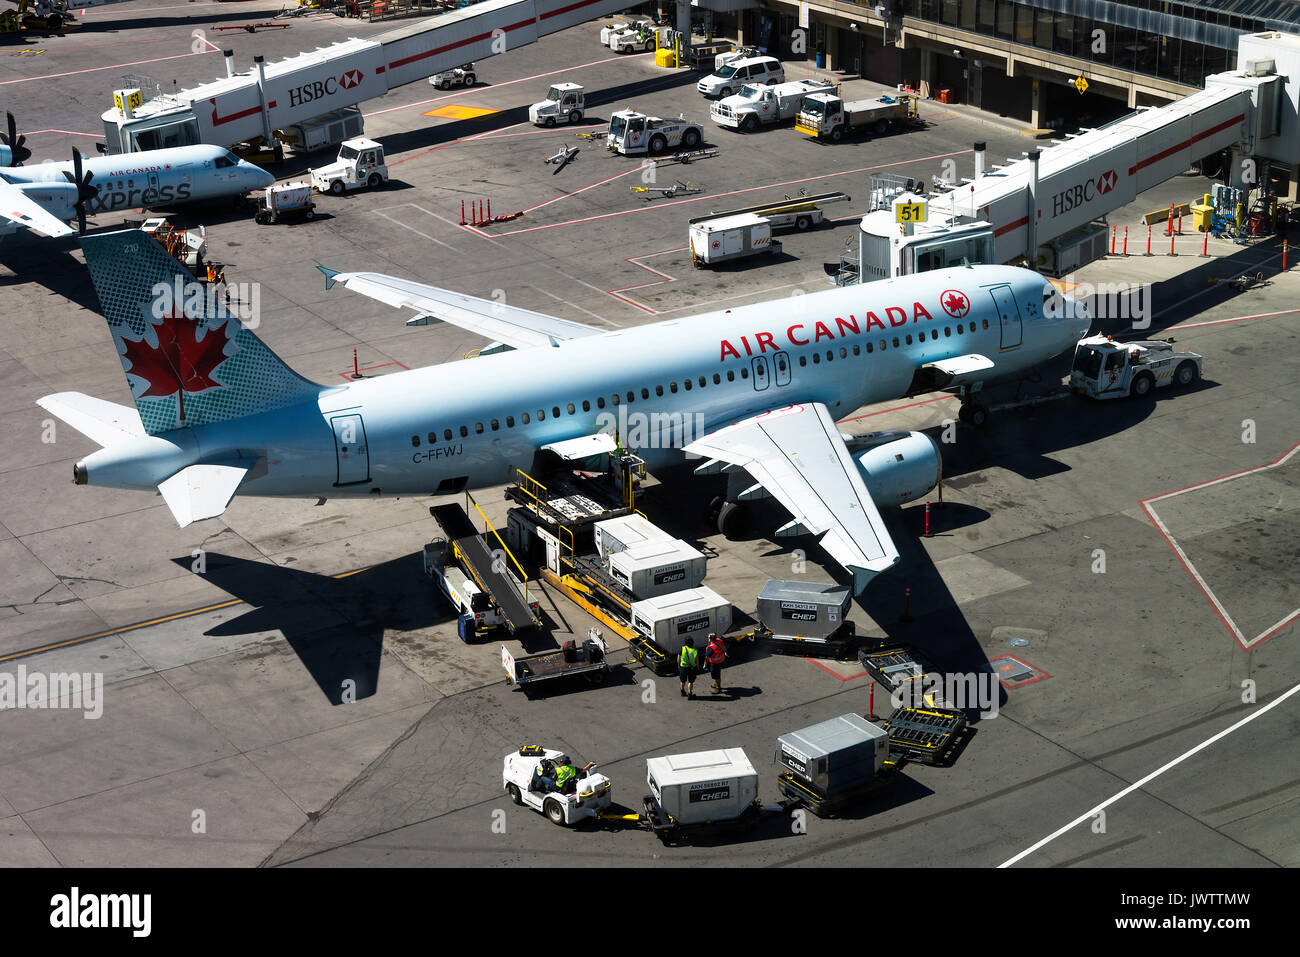 Air Canada Airline Airbus A320-211 Airliner C-FFWJ on Stand Awaiting Departure at Calgary Airport Alberta Canada Stock Photo